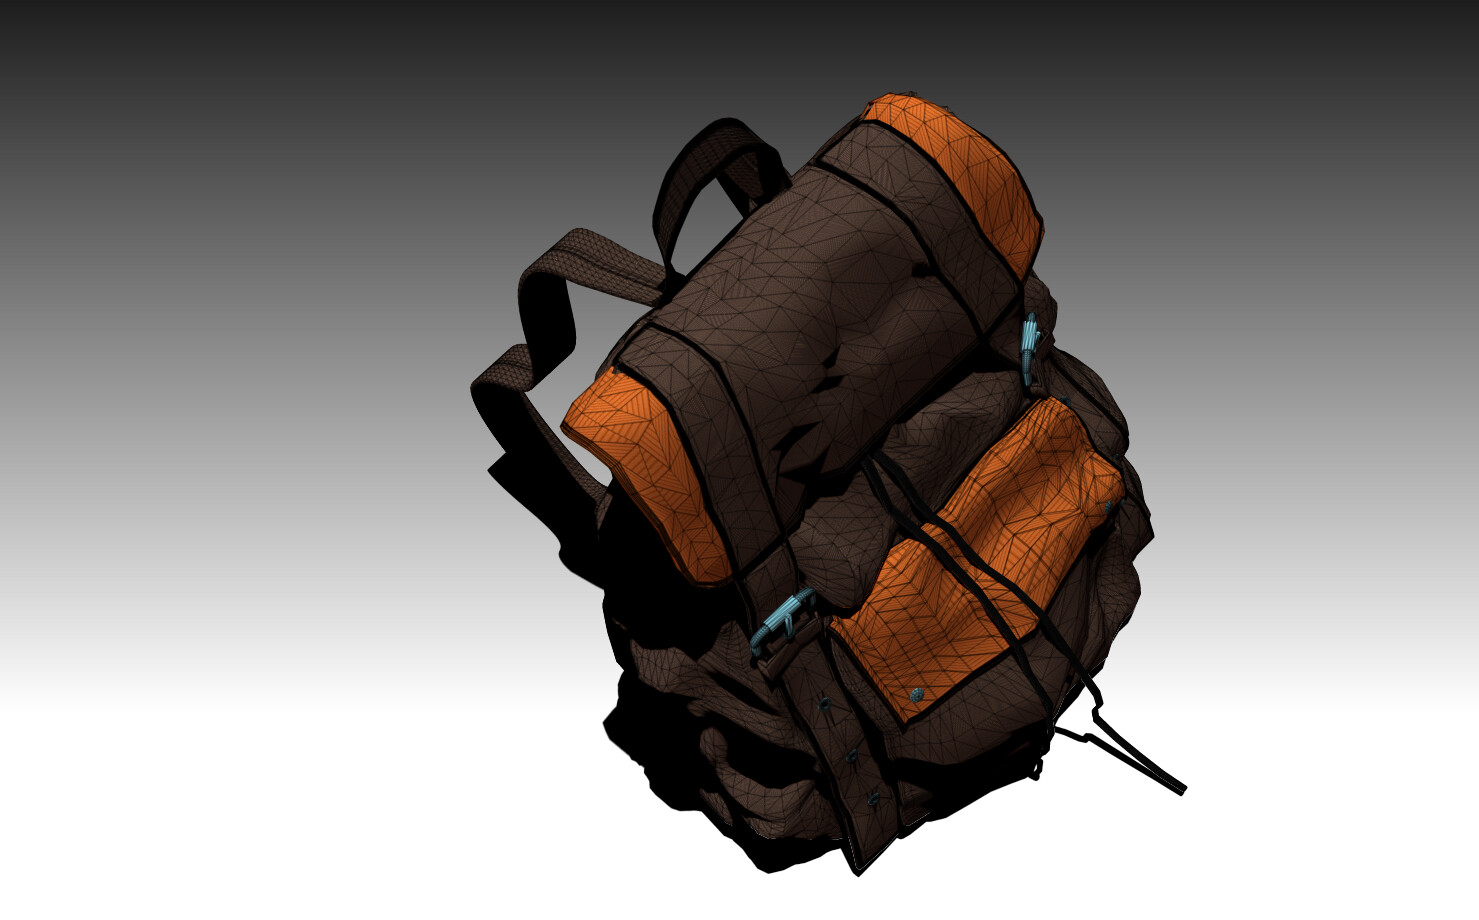 3D model Louis Vuitton Palm Springs Backpack VR / AR / low-poly